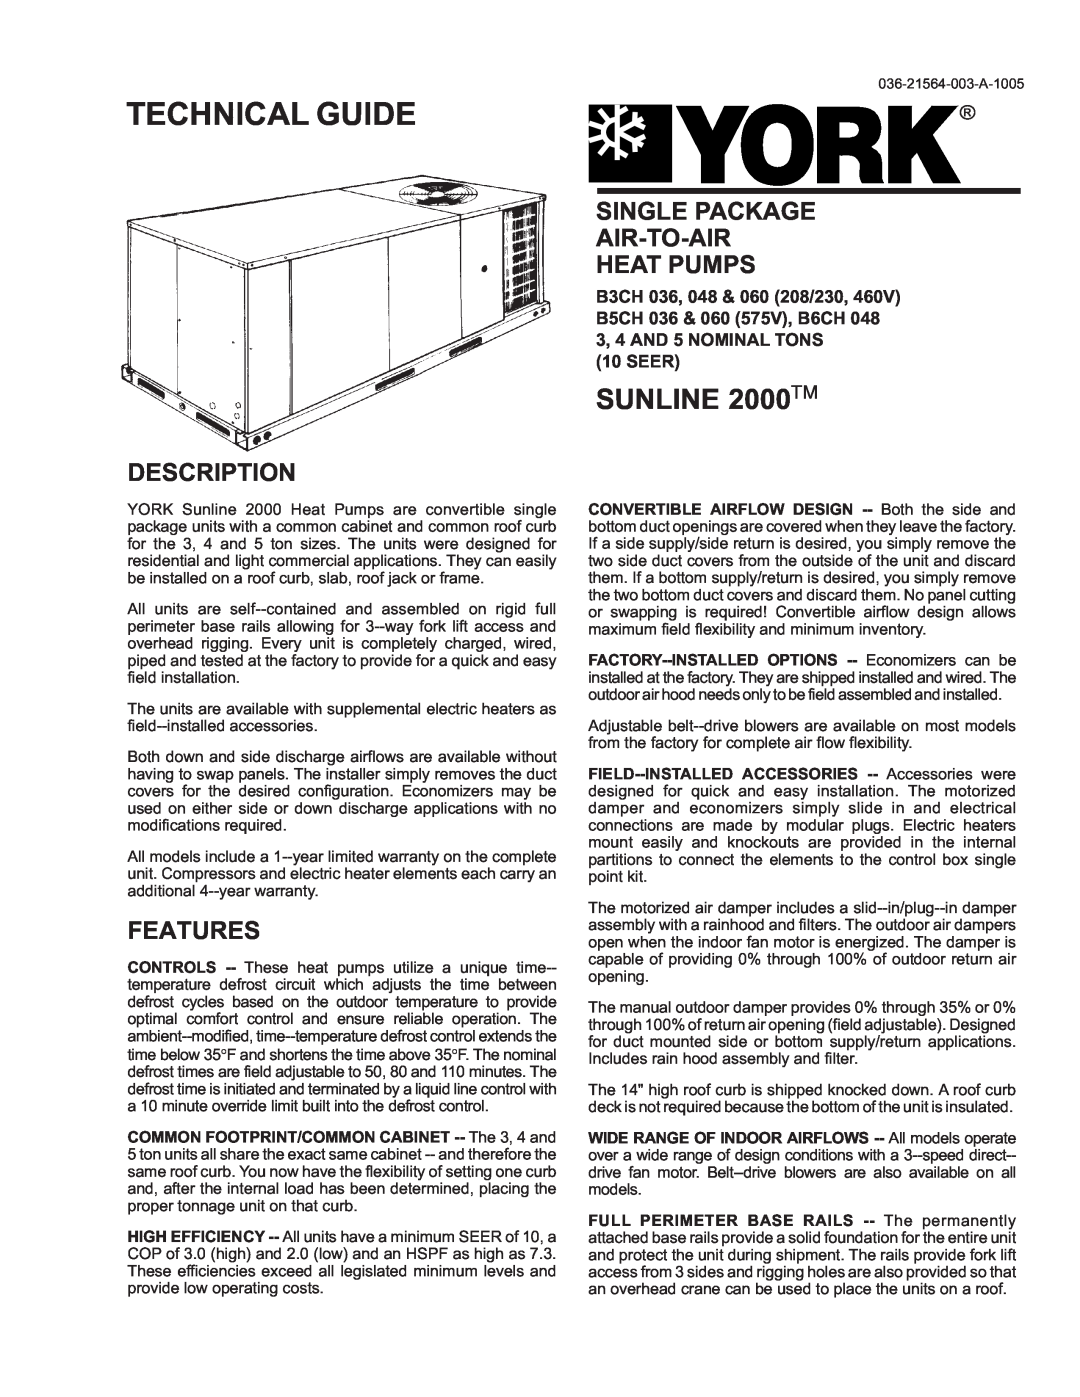 York 2000 warranty Description, Single Package Air-To-Air Heat Pumps, Features, Seer, Technical Guide, Sunline 